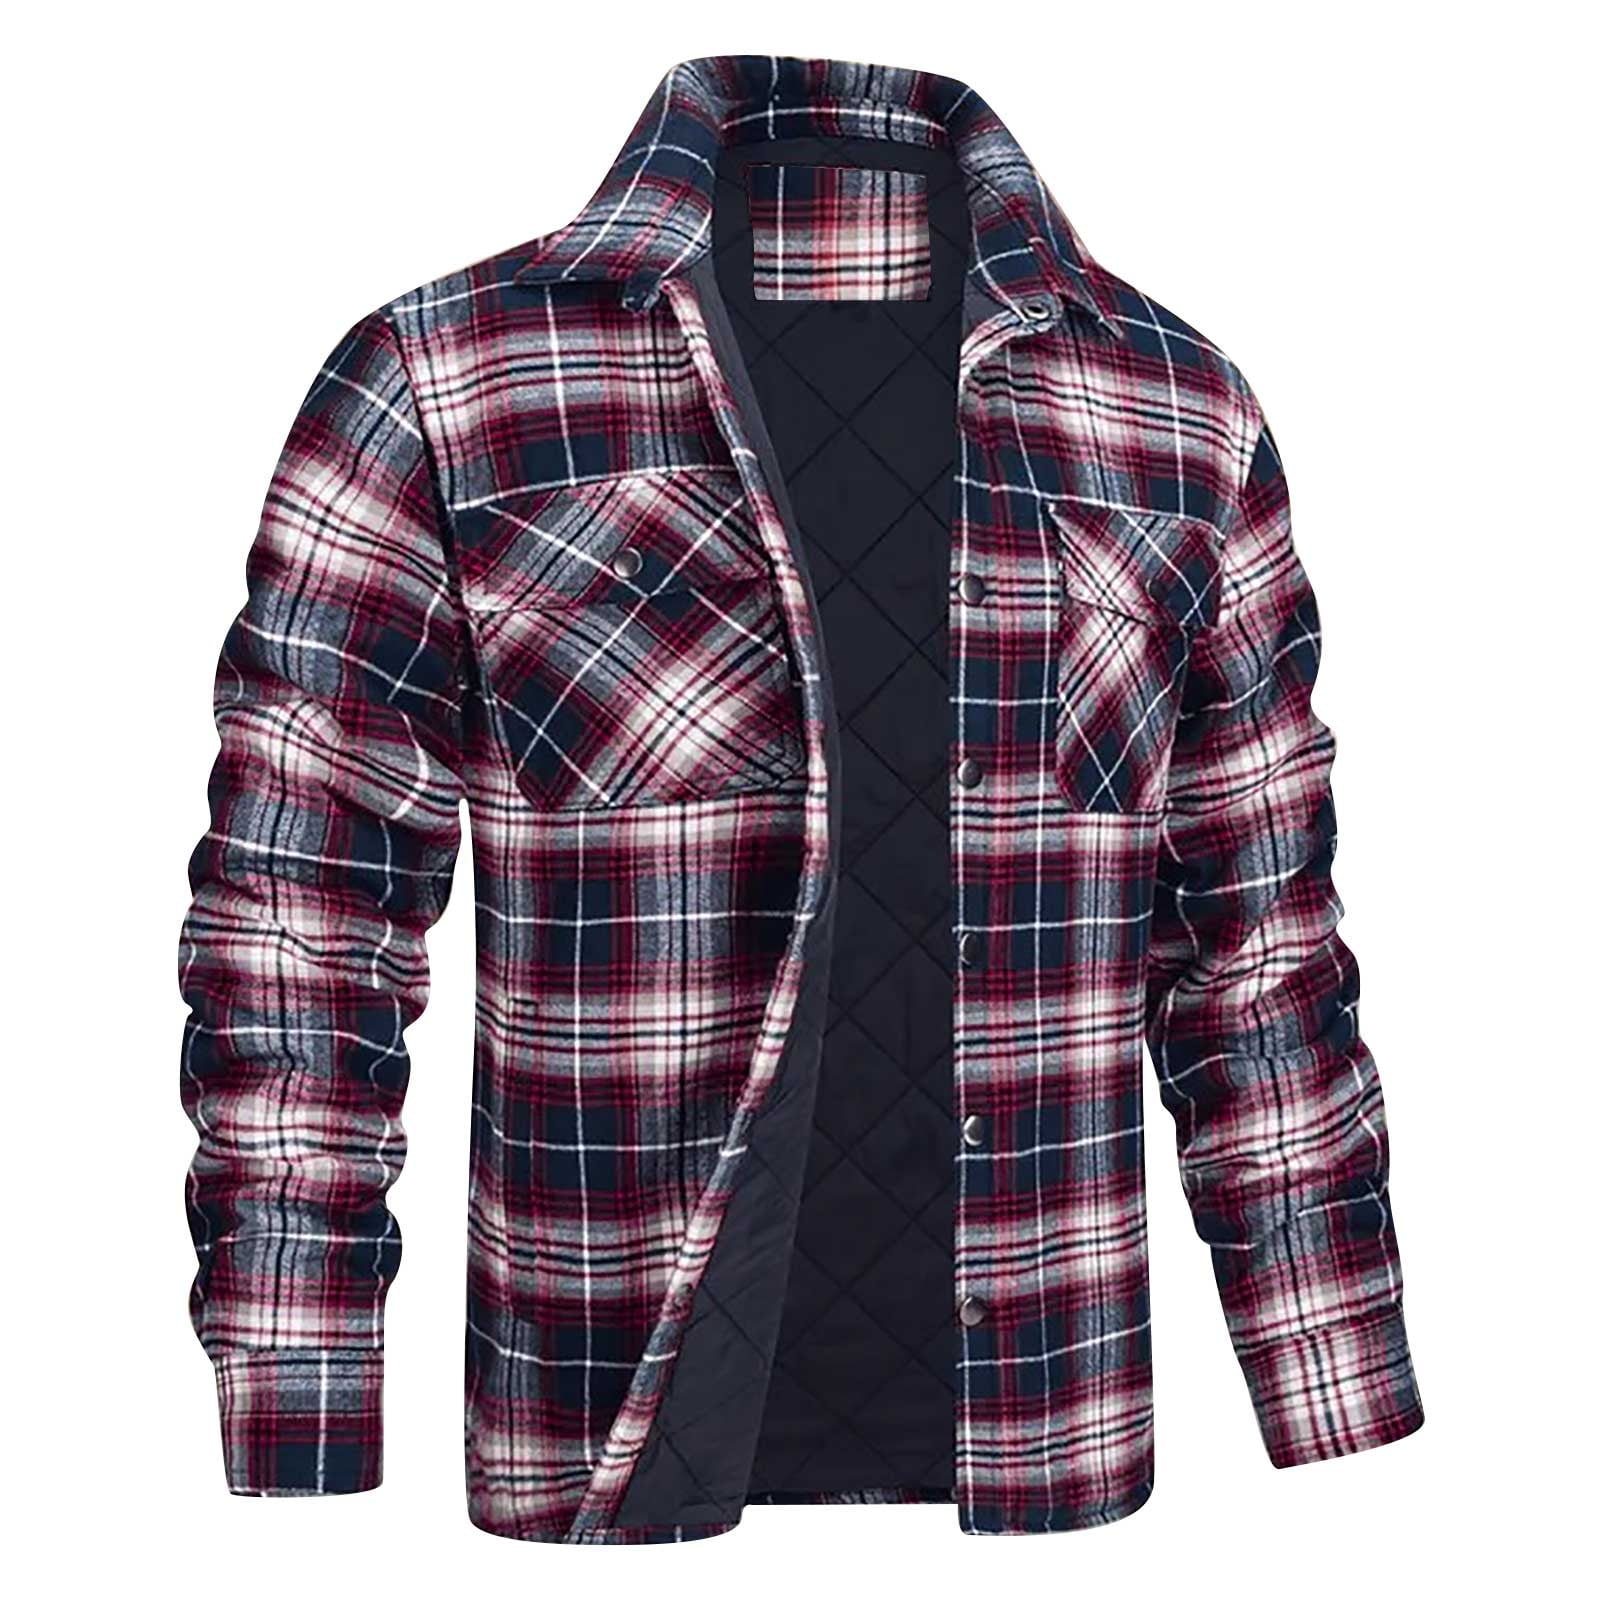 JGGSPWM Men's Thicken Plaid Hooded Flannel Shirt Jacket with Quilted ...